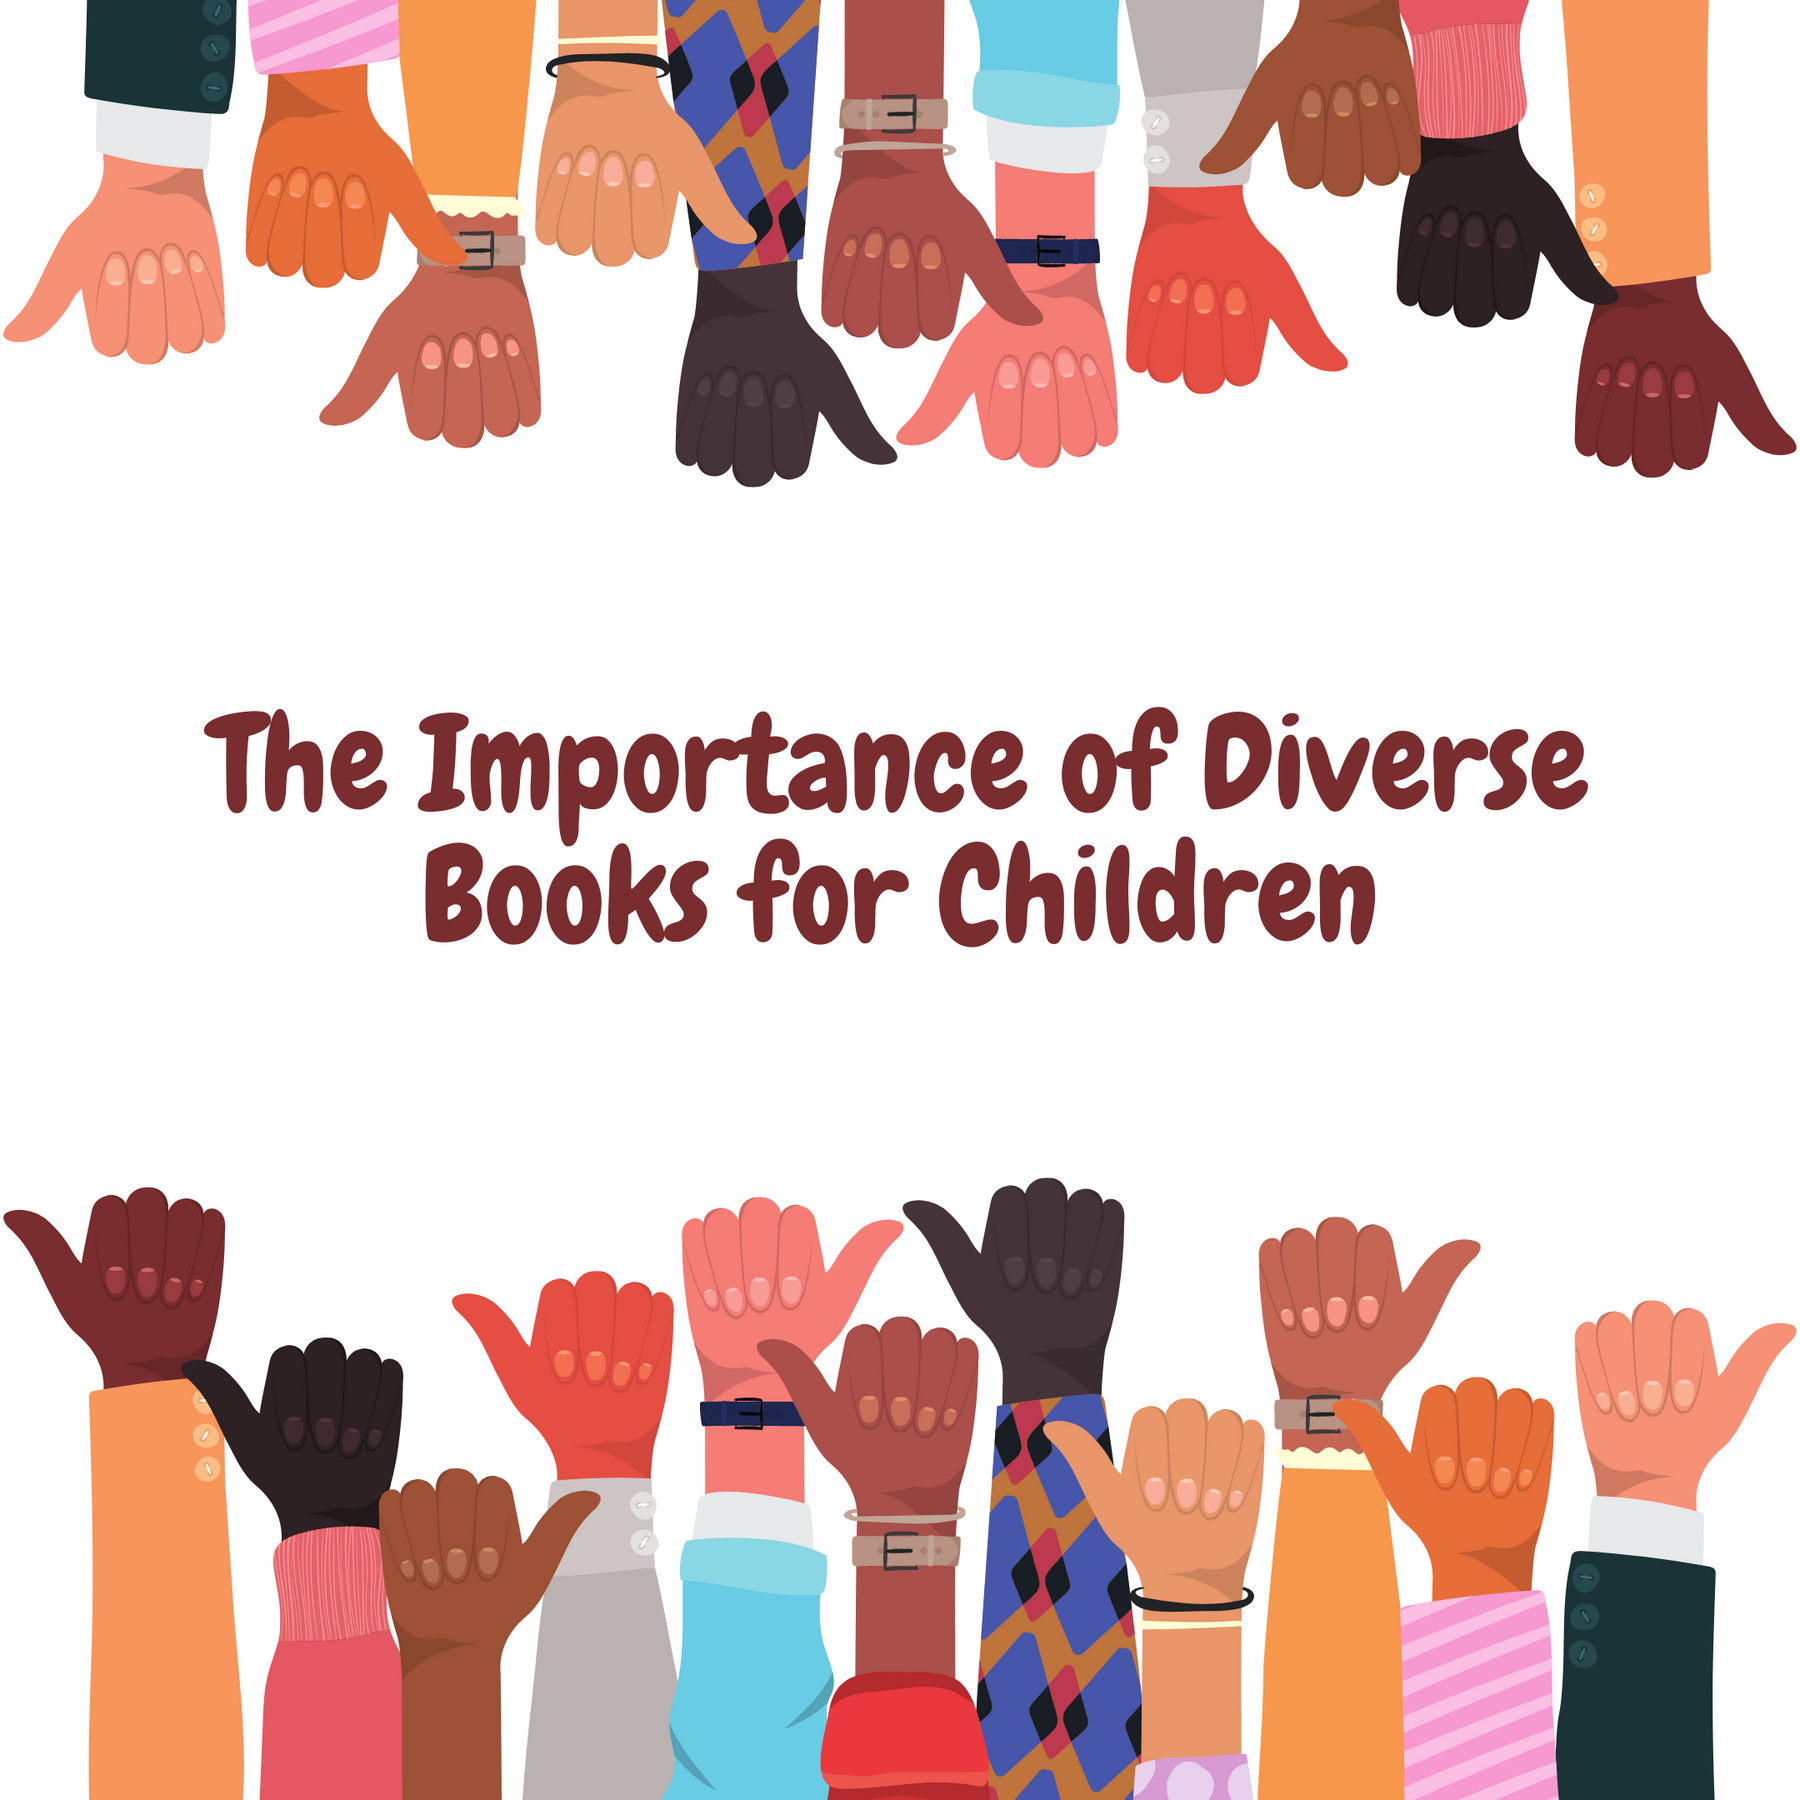 Growing Minds: The Importance of Diverse Books for Children